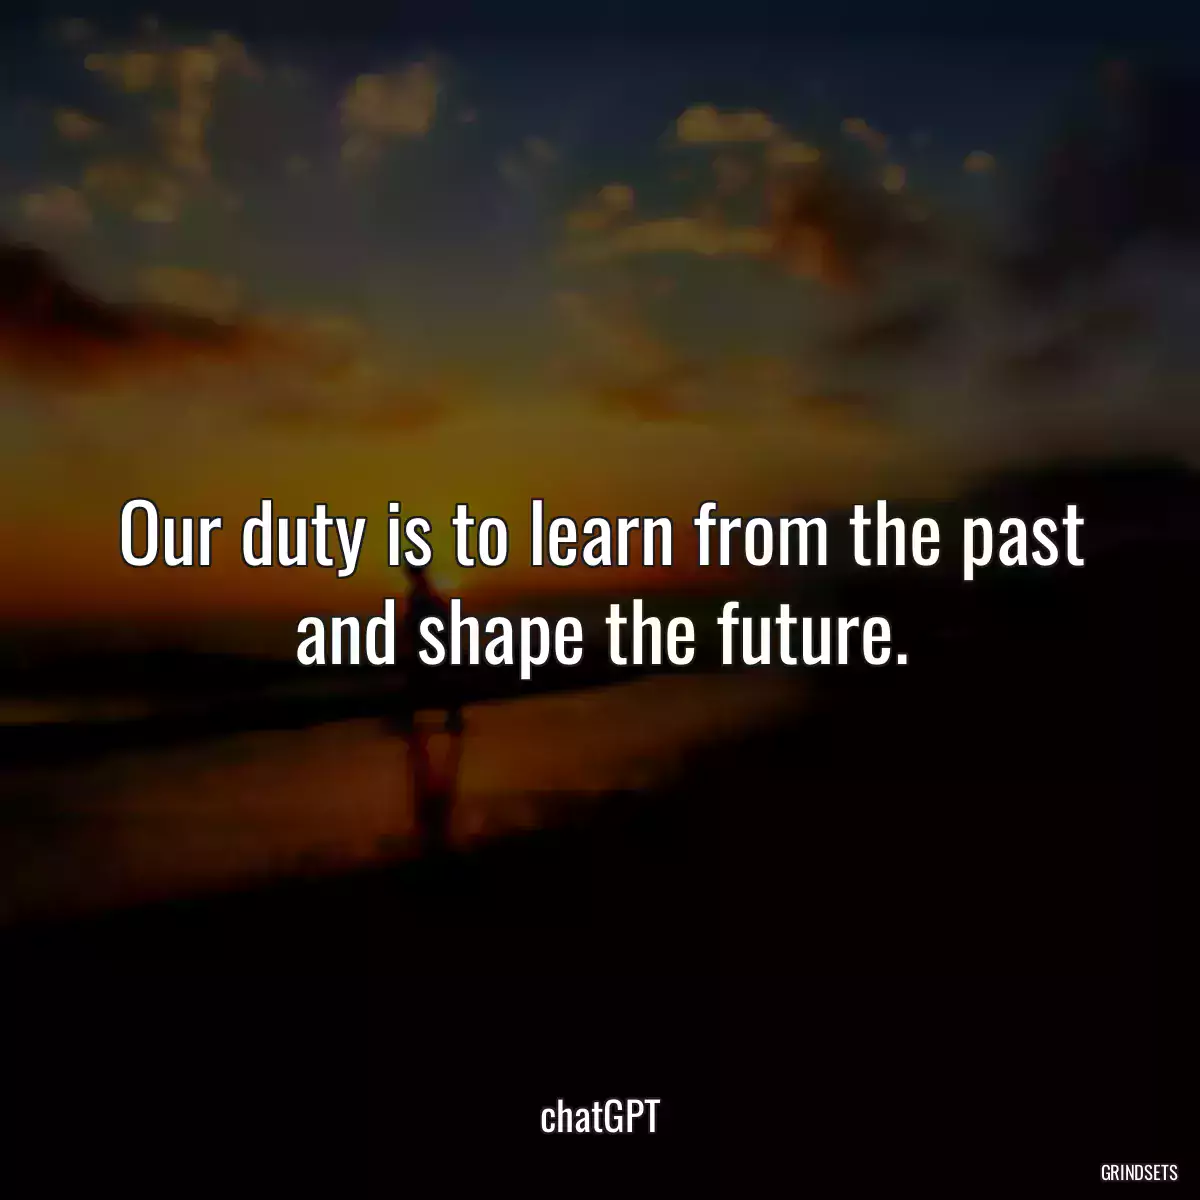 Our duty is to learn from the past and shape the future.